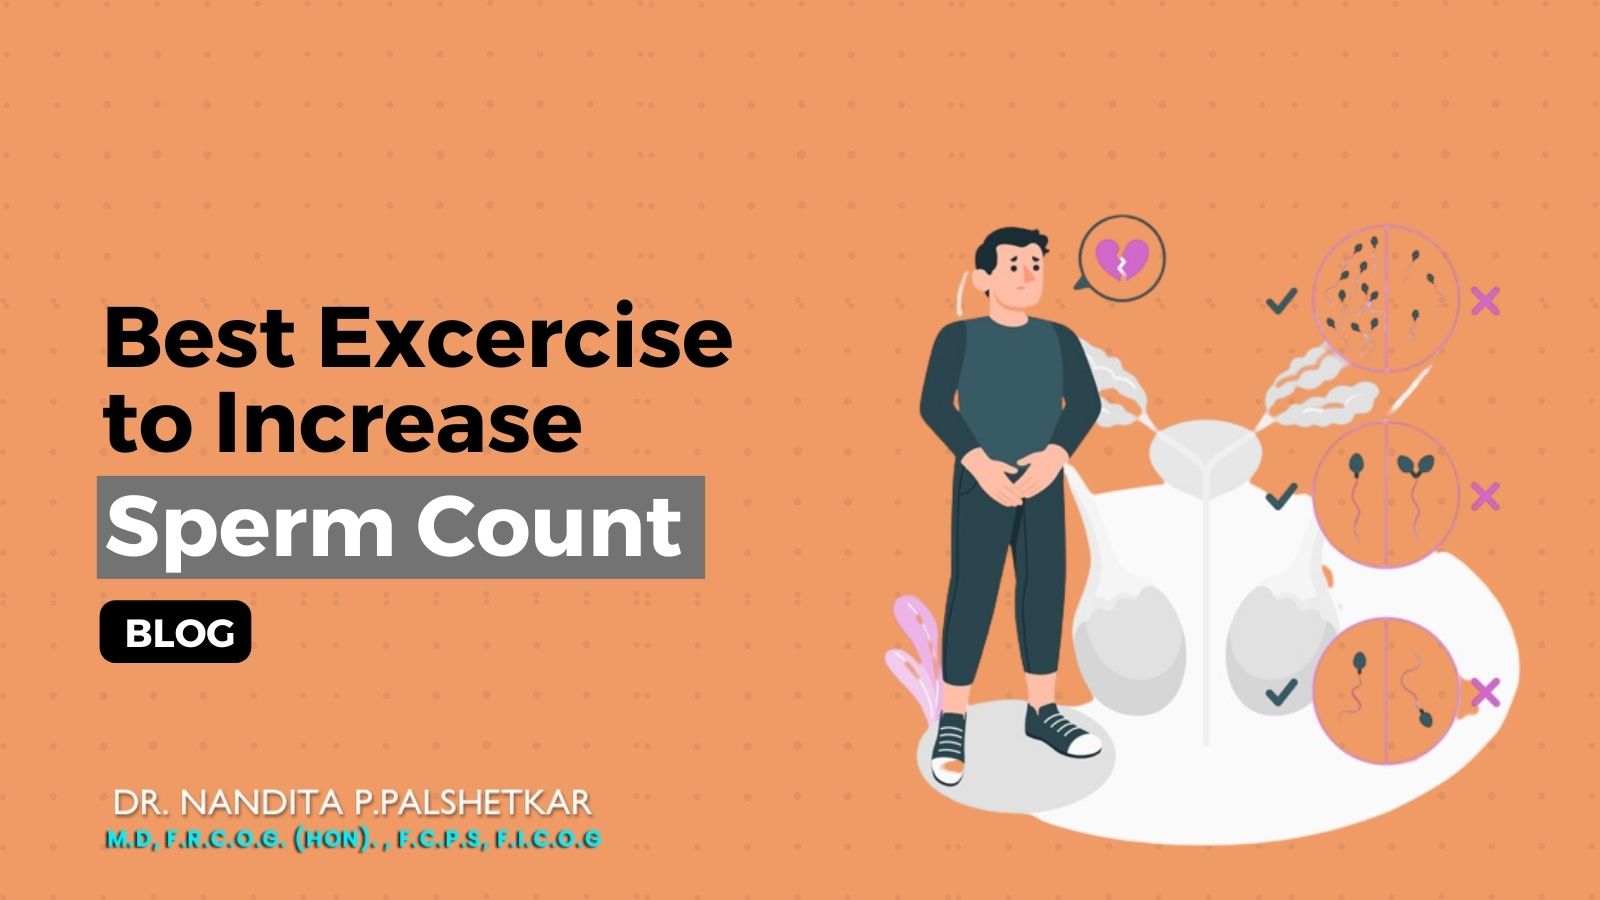 Exercises to Increase Sperm Count and Improve Male Fertility